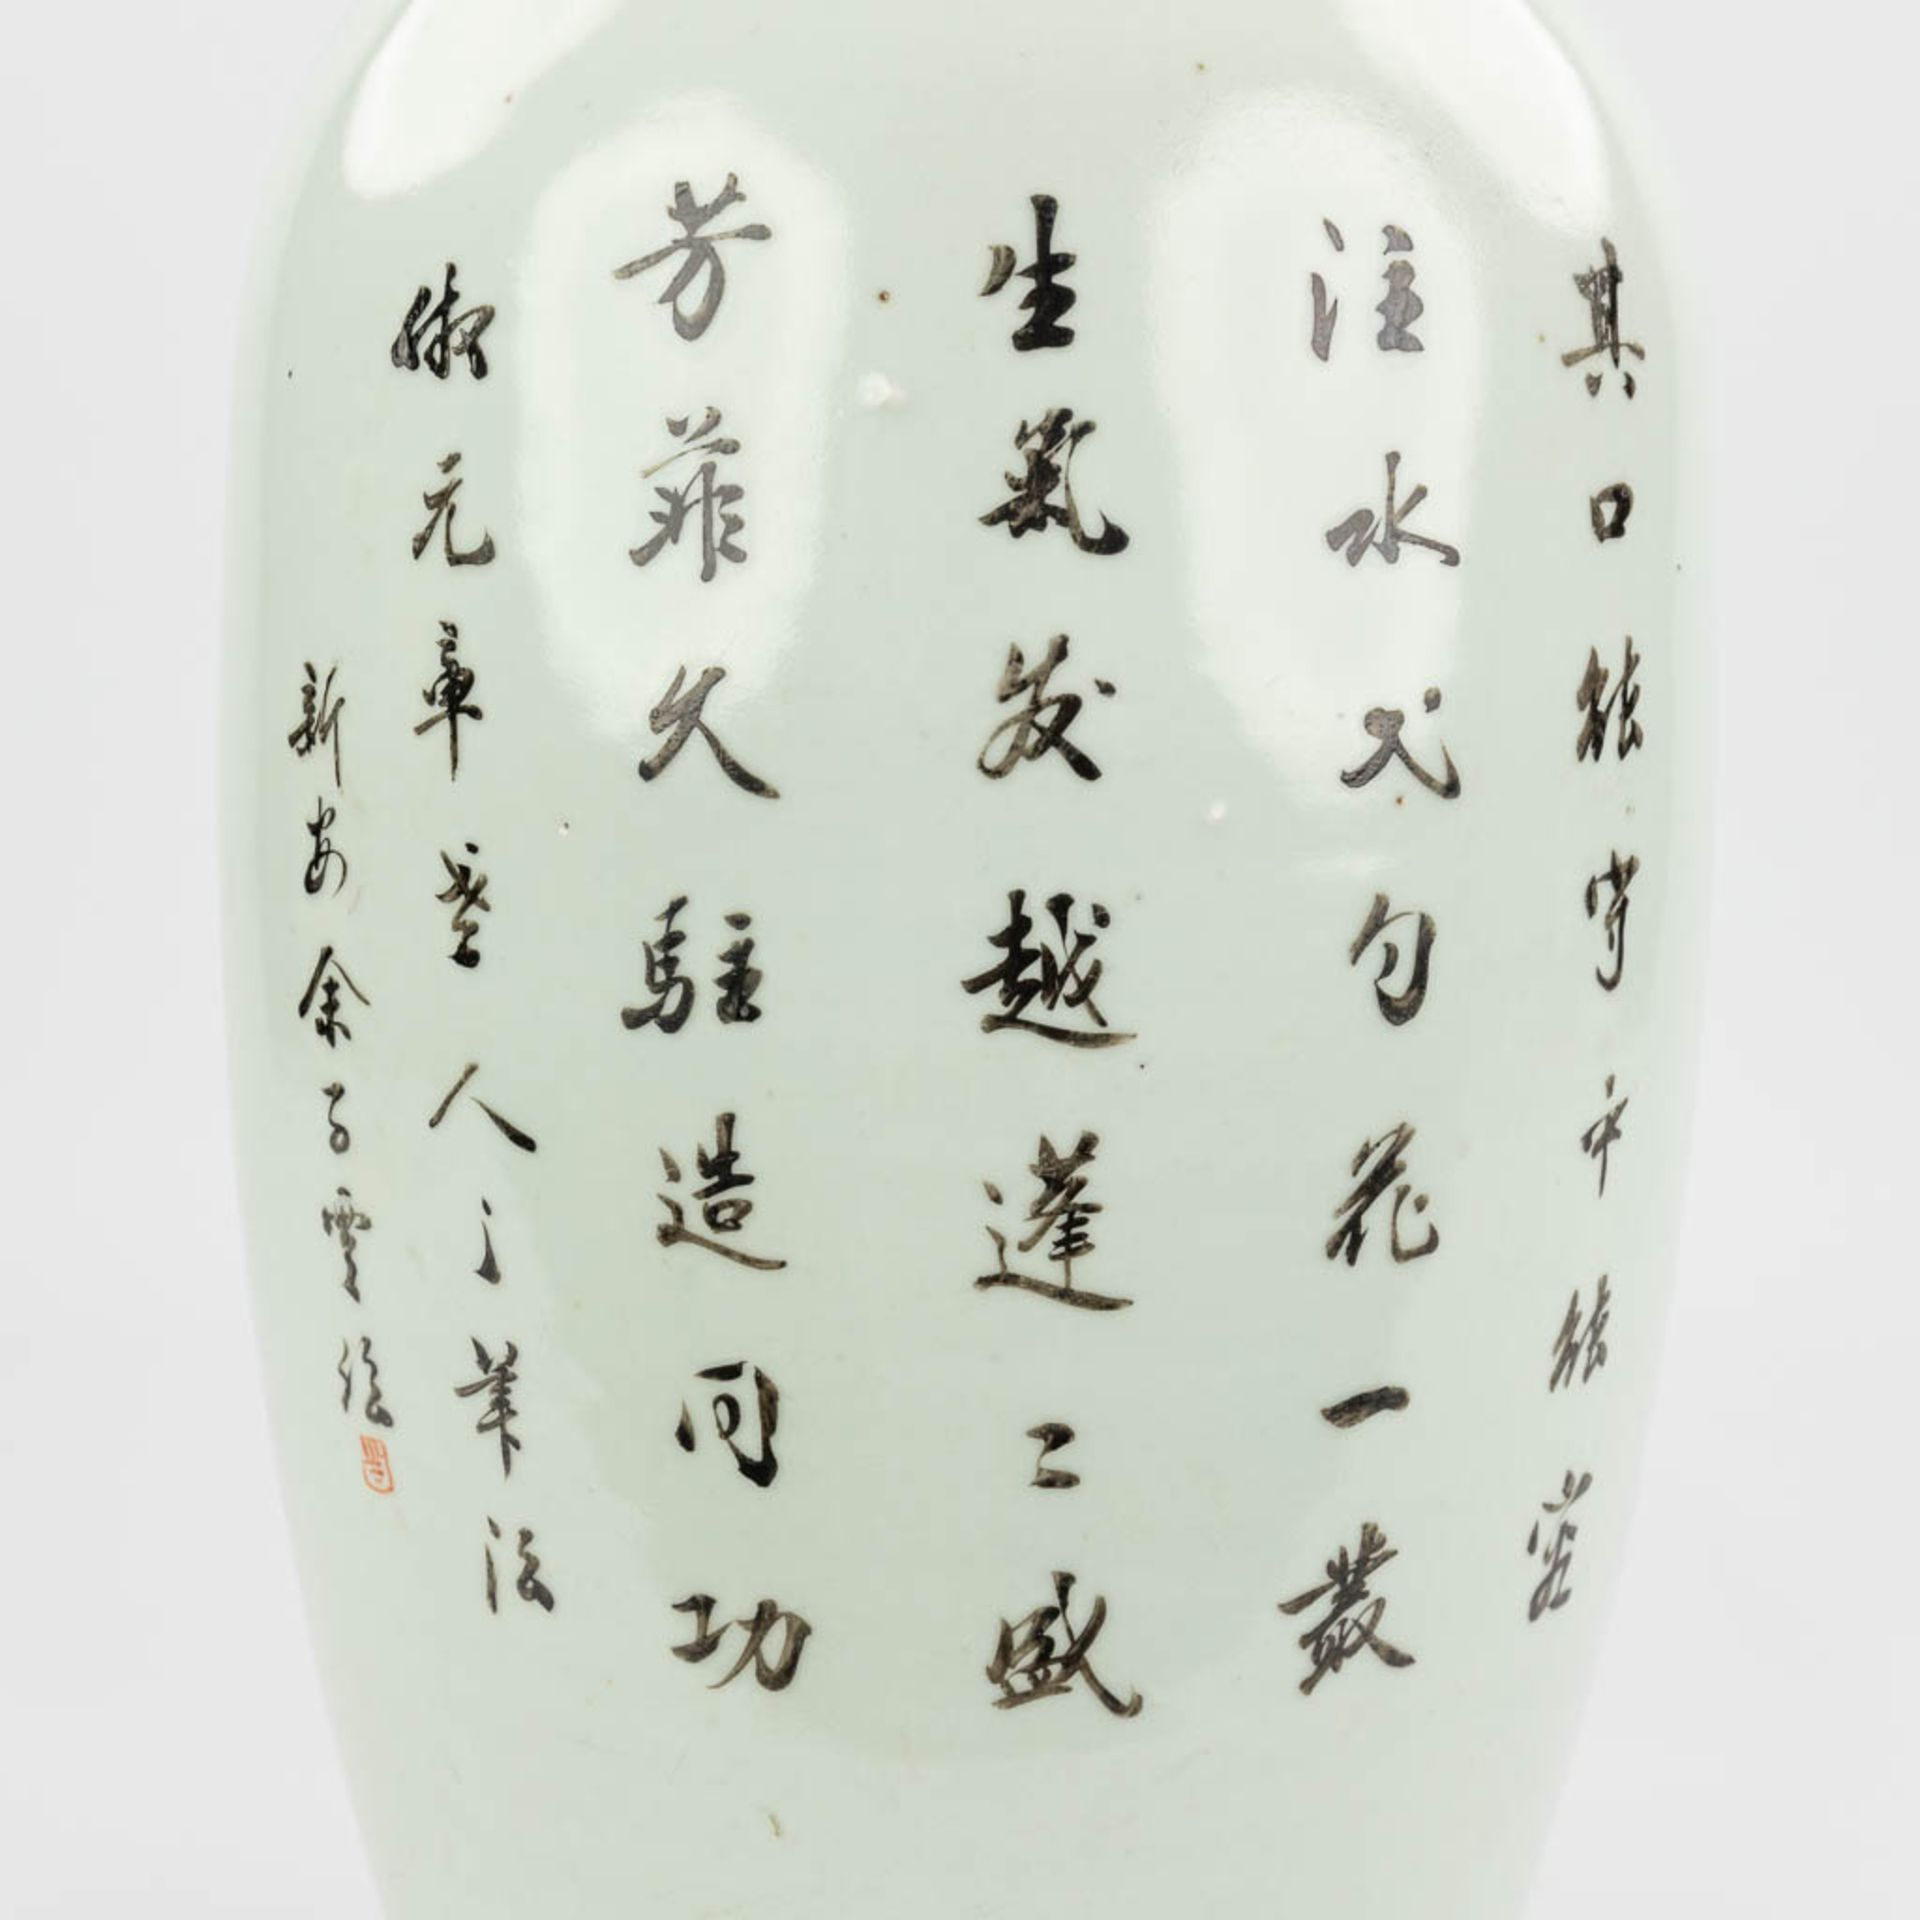 A Chinese vase made of porcelain andÊdecor of ladies near a large rock. (57,5 x 23 cm) - Image 10 of 13